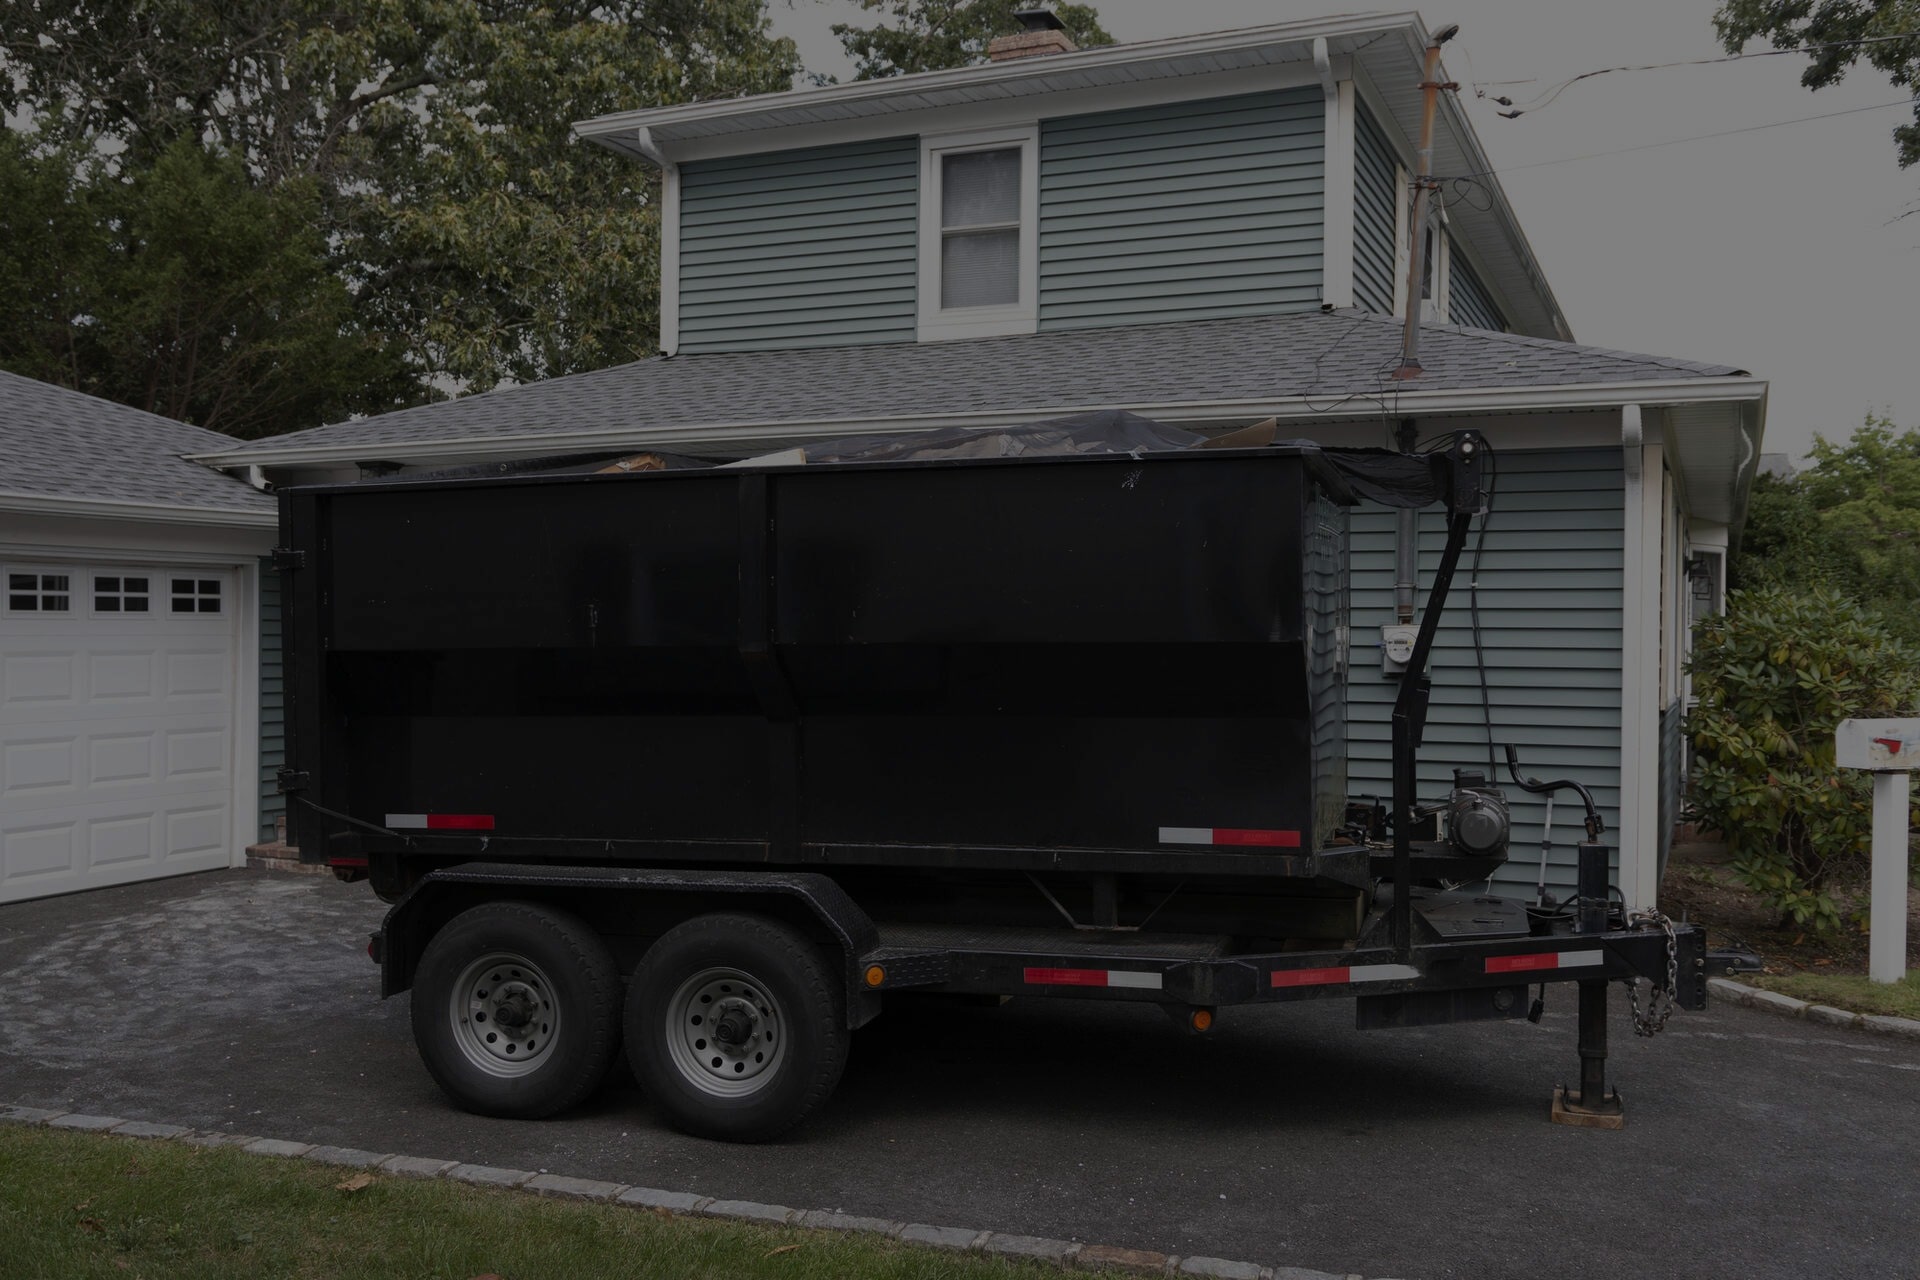 What Are the Top Reasons People Rent Large Dumpsters?